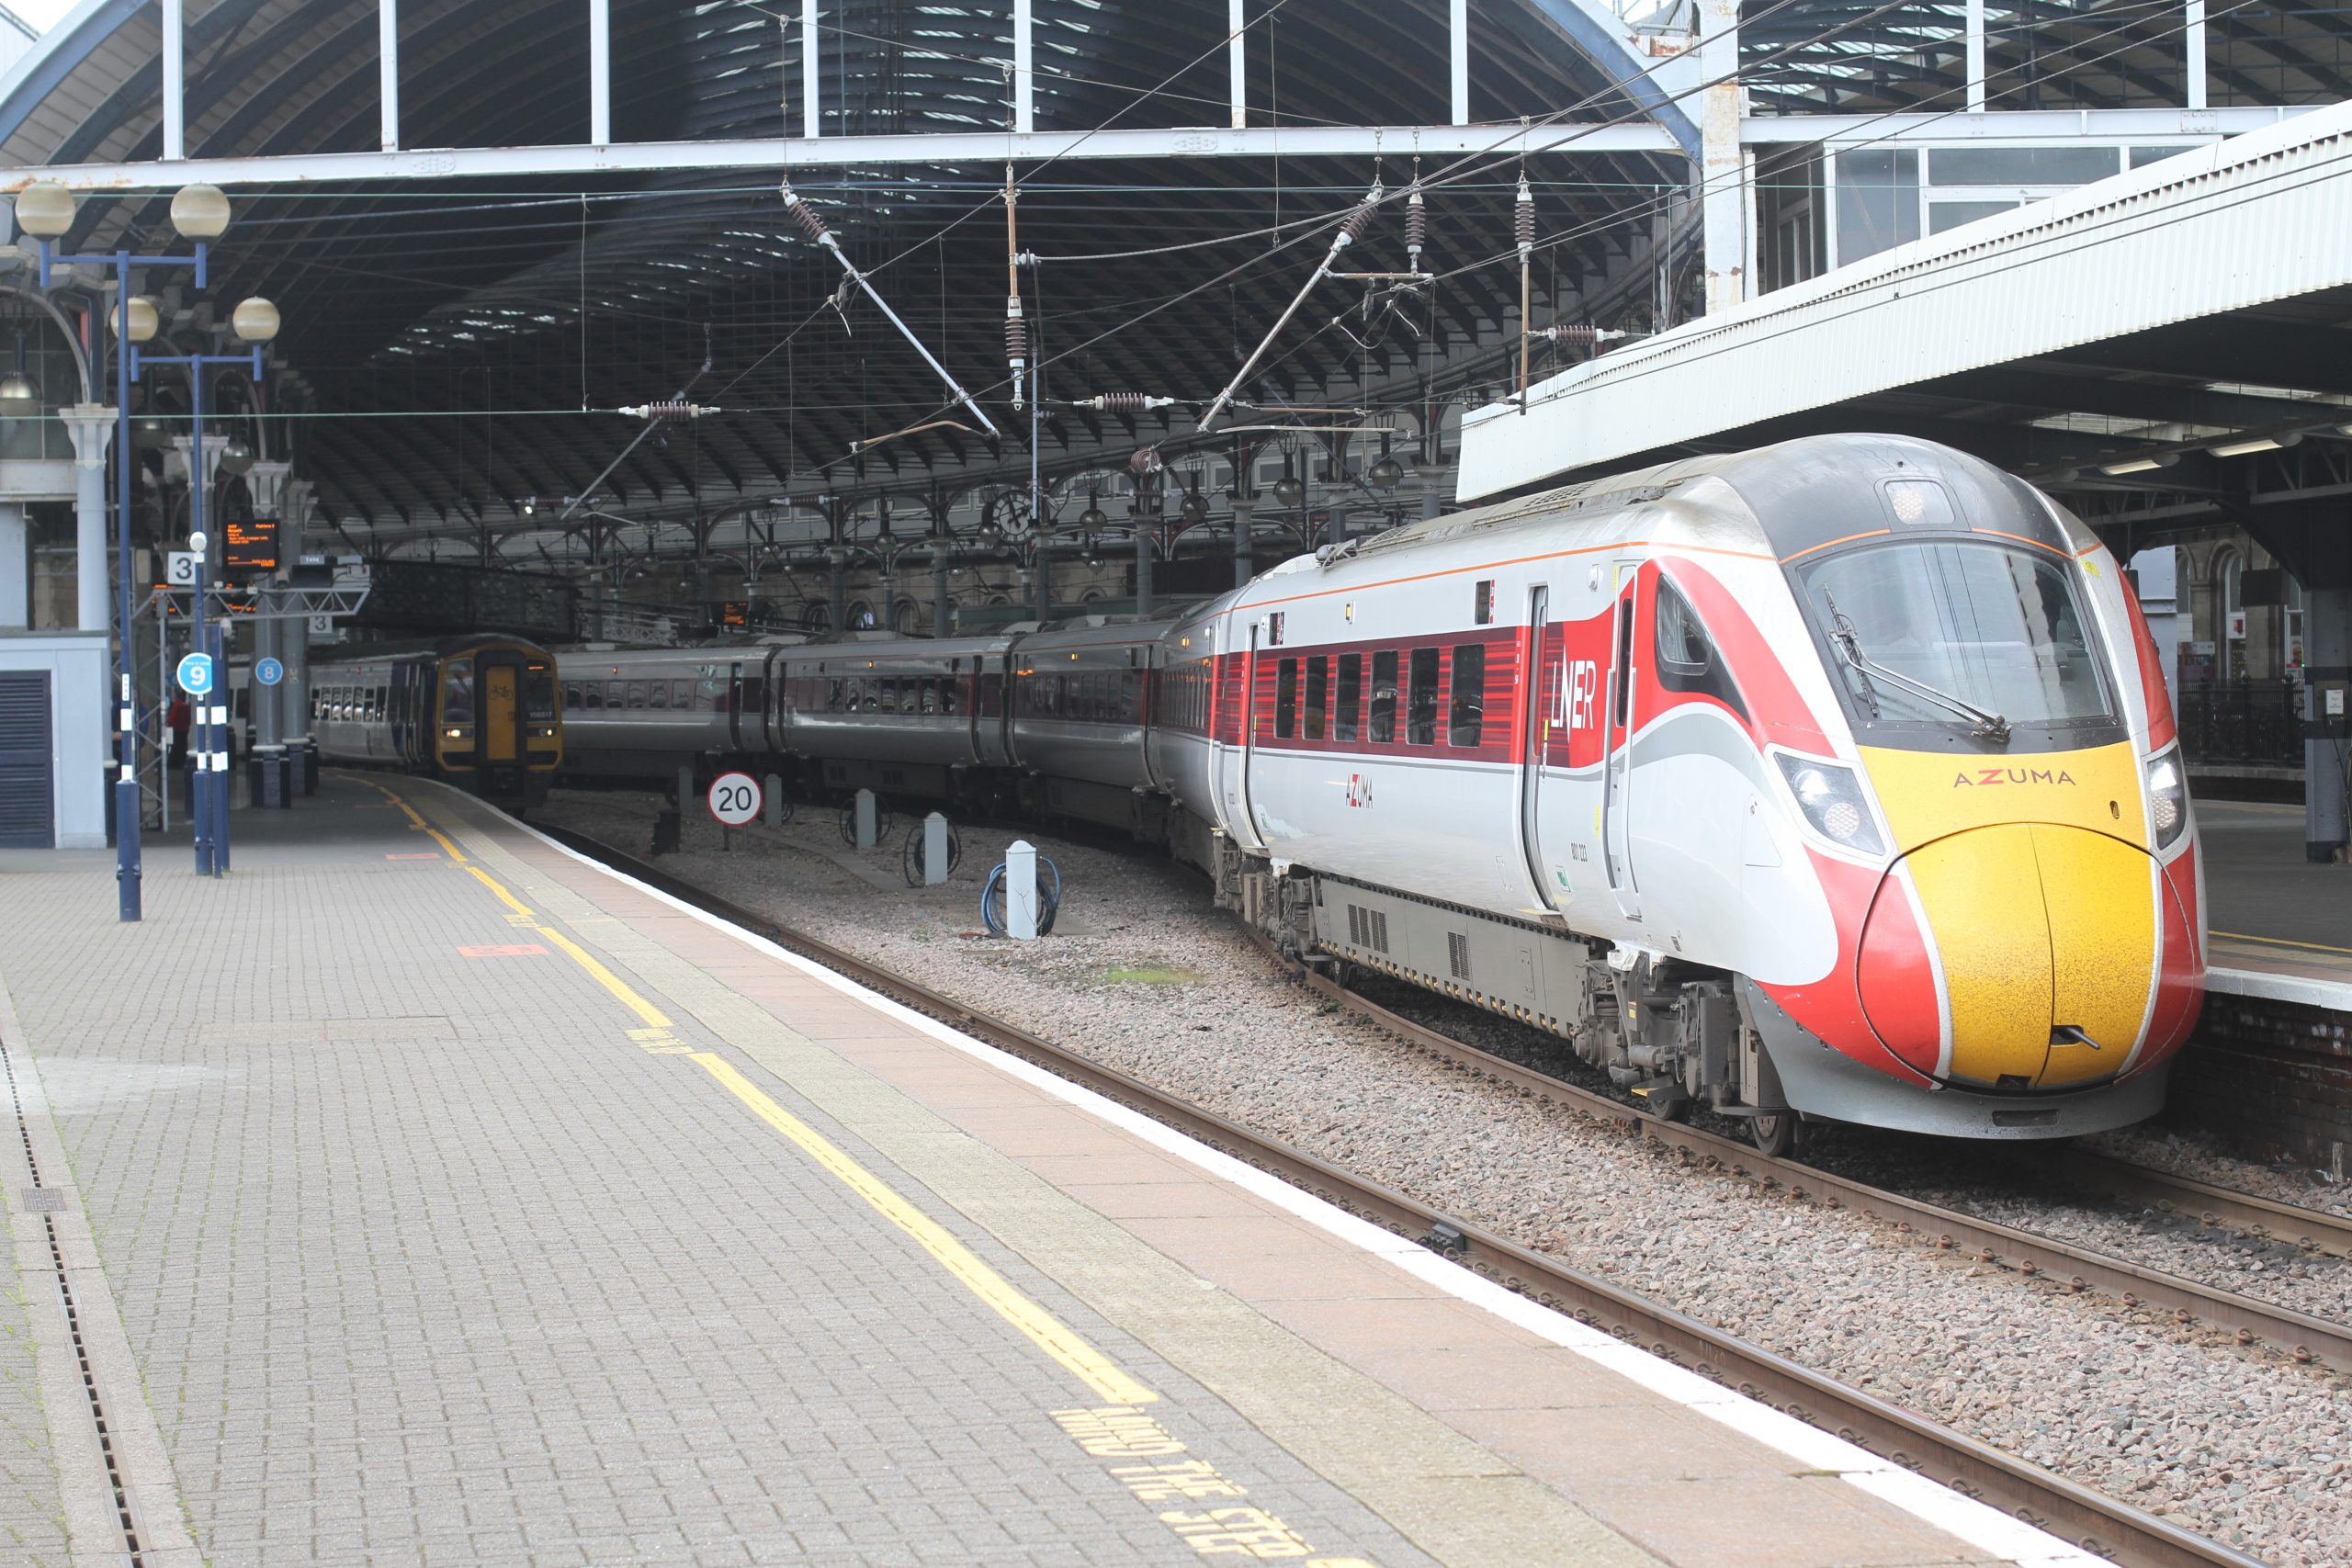 Azuma unit 801223 with the 1S13 11:00 service from Kings Cross – Edinburgh at Newcastle Central : Image credit - Alan Turton